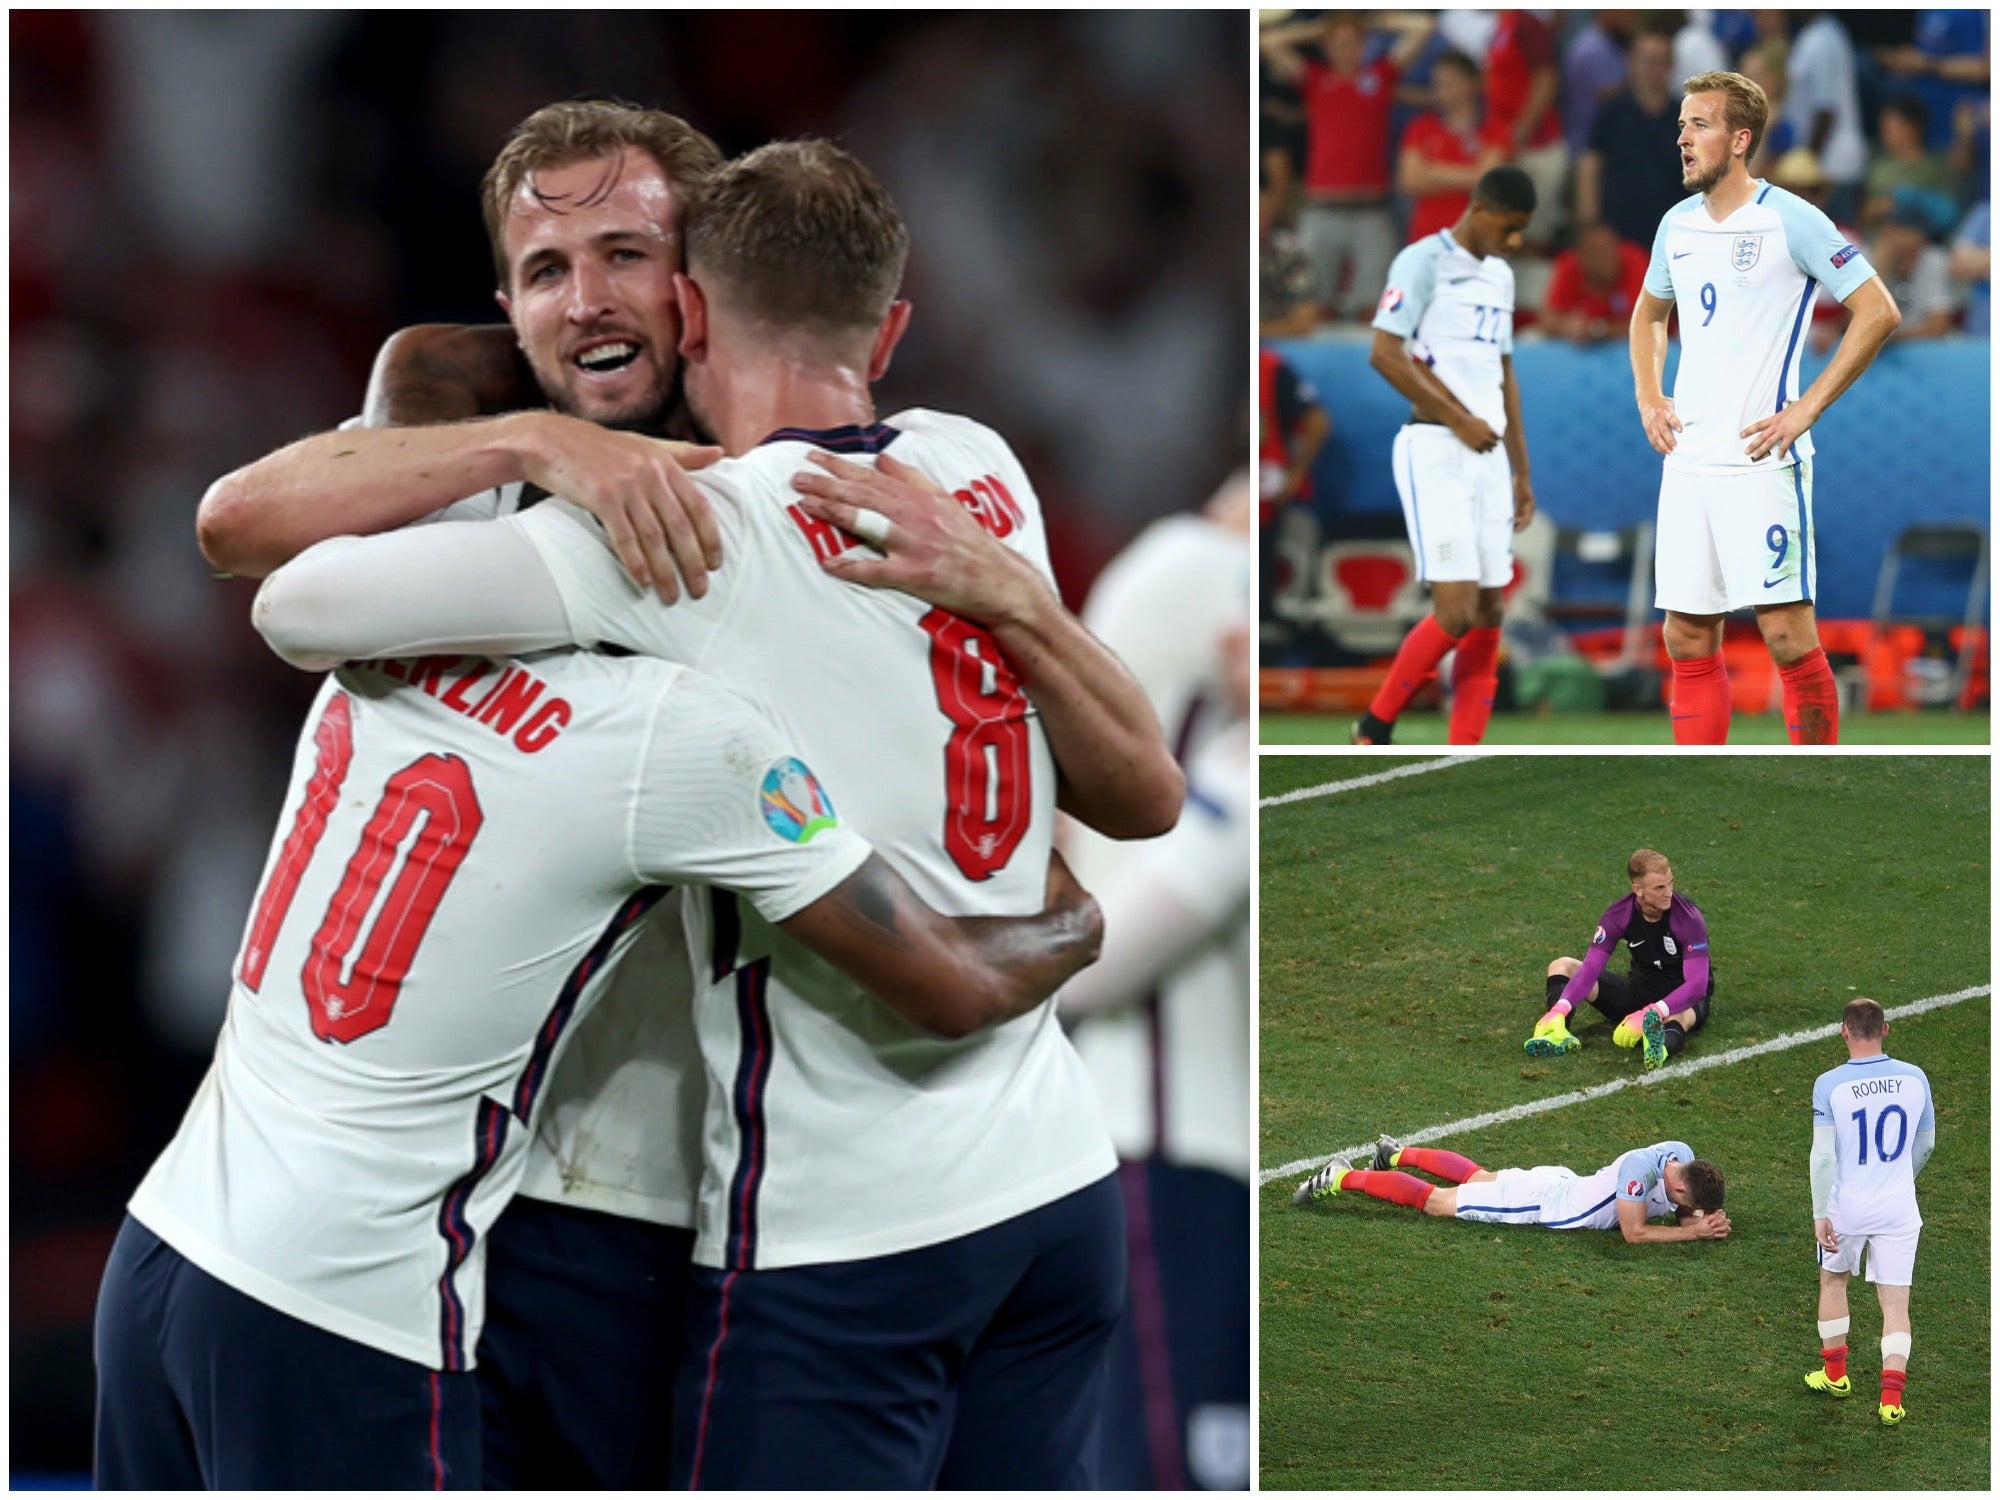 England are in the Euro 2020 final five years on from losing to Iceland